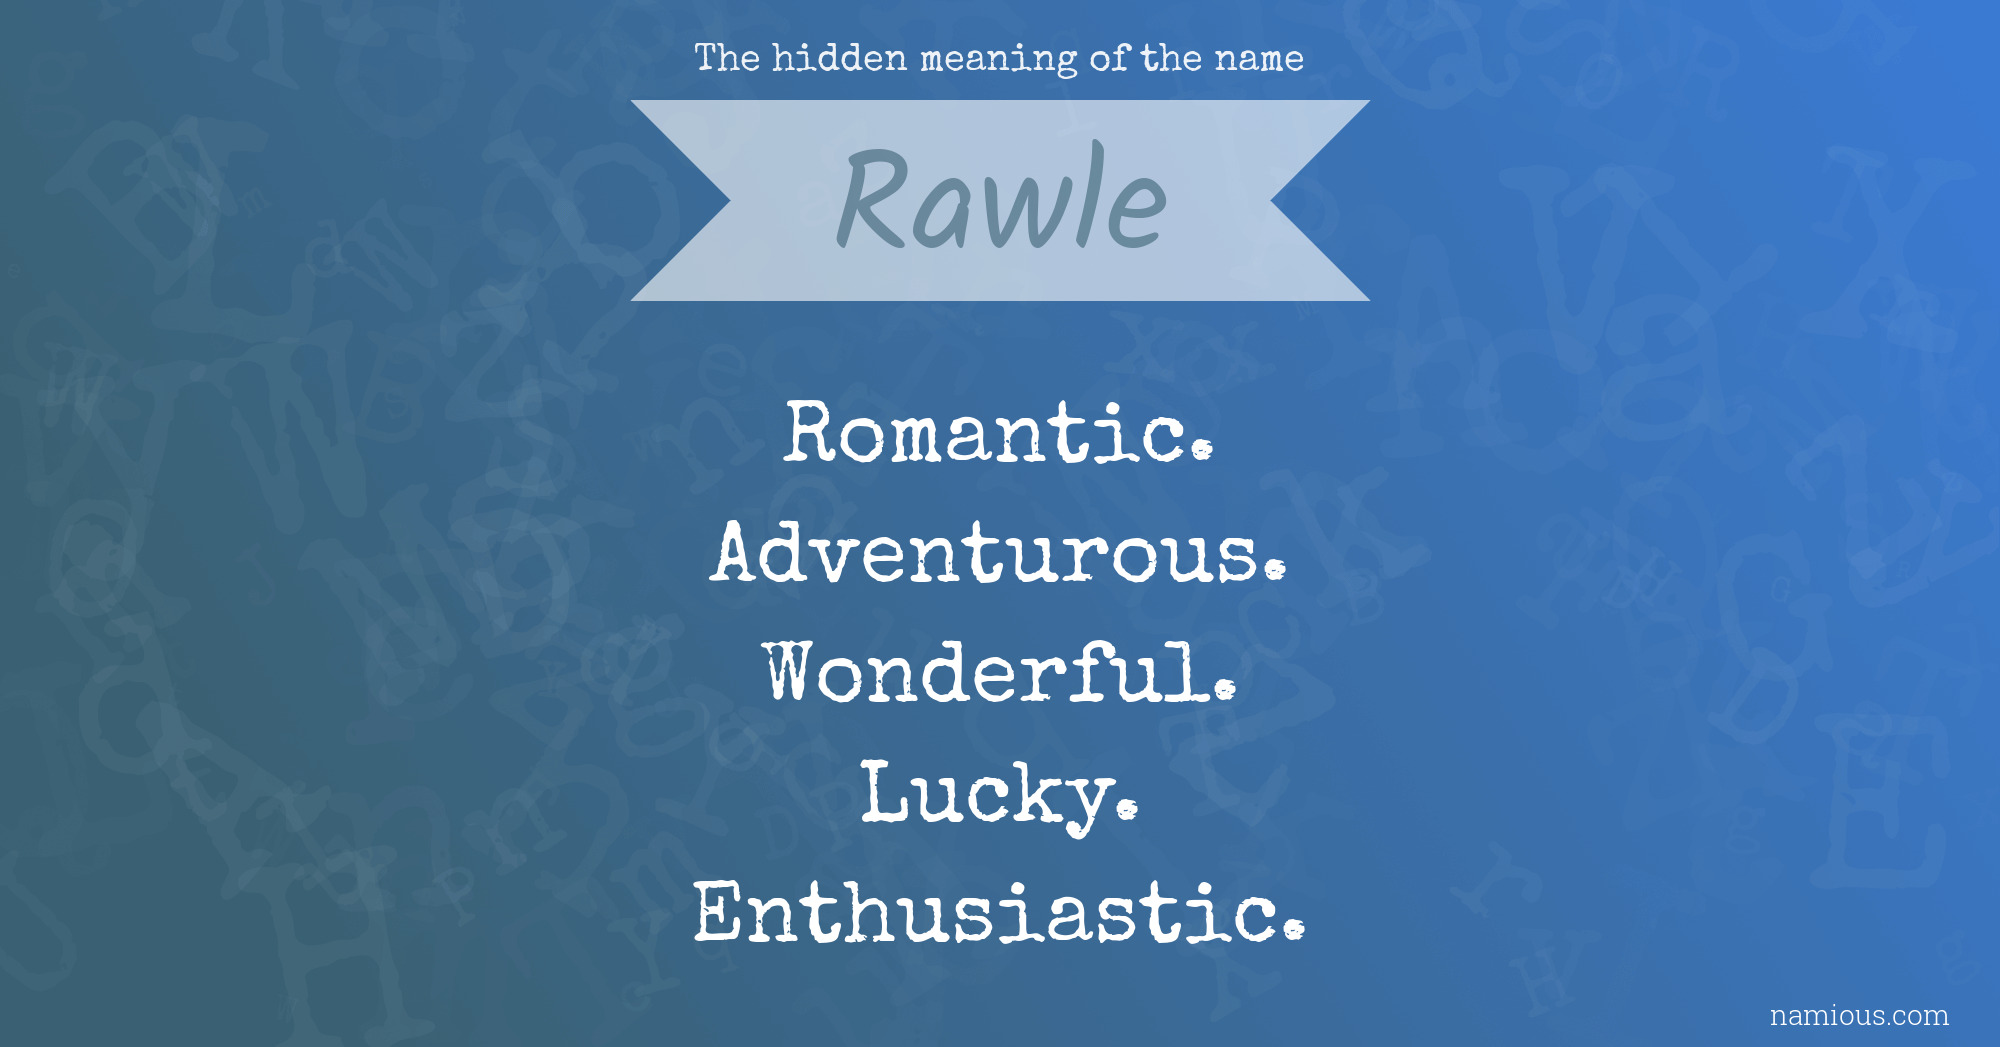 The hidden meaning of the name Rawle